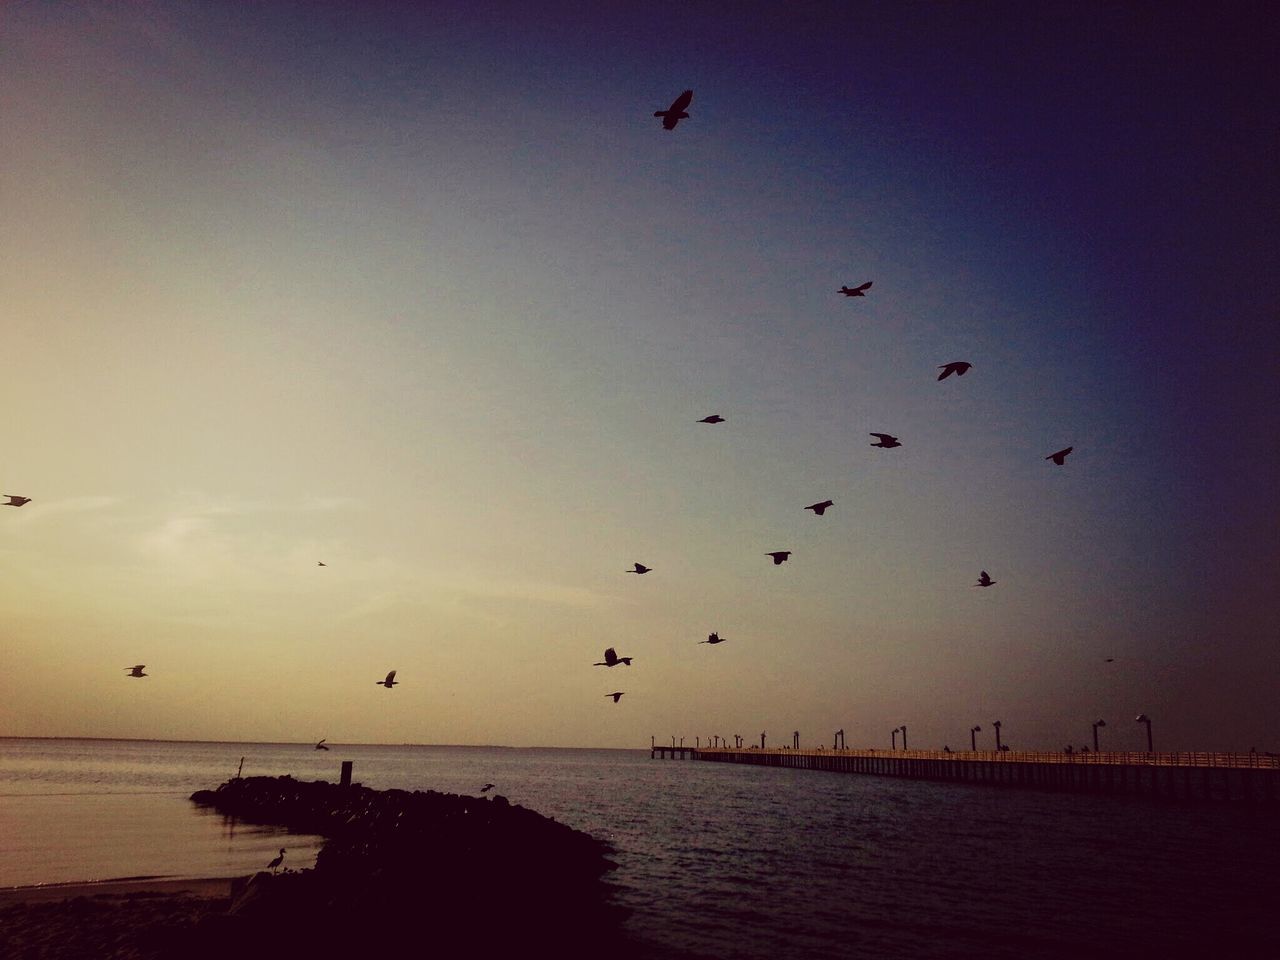 bird, flying, water, animal themes, animals in the wild, sea, wildlife, flock of birds, sky, silhouette, sunset, horizon over water, scenics, nature, tranquil scene, tranquility, waterfront, beauty in nature, mid-air